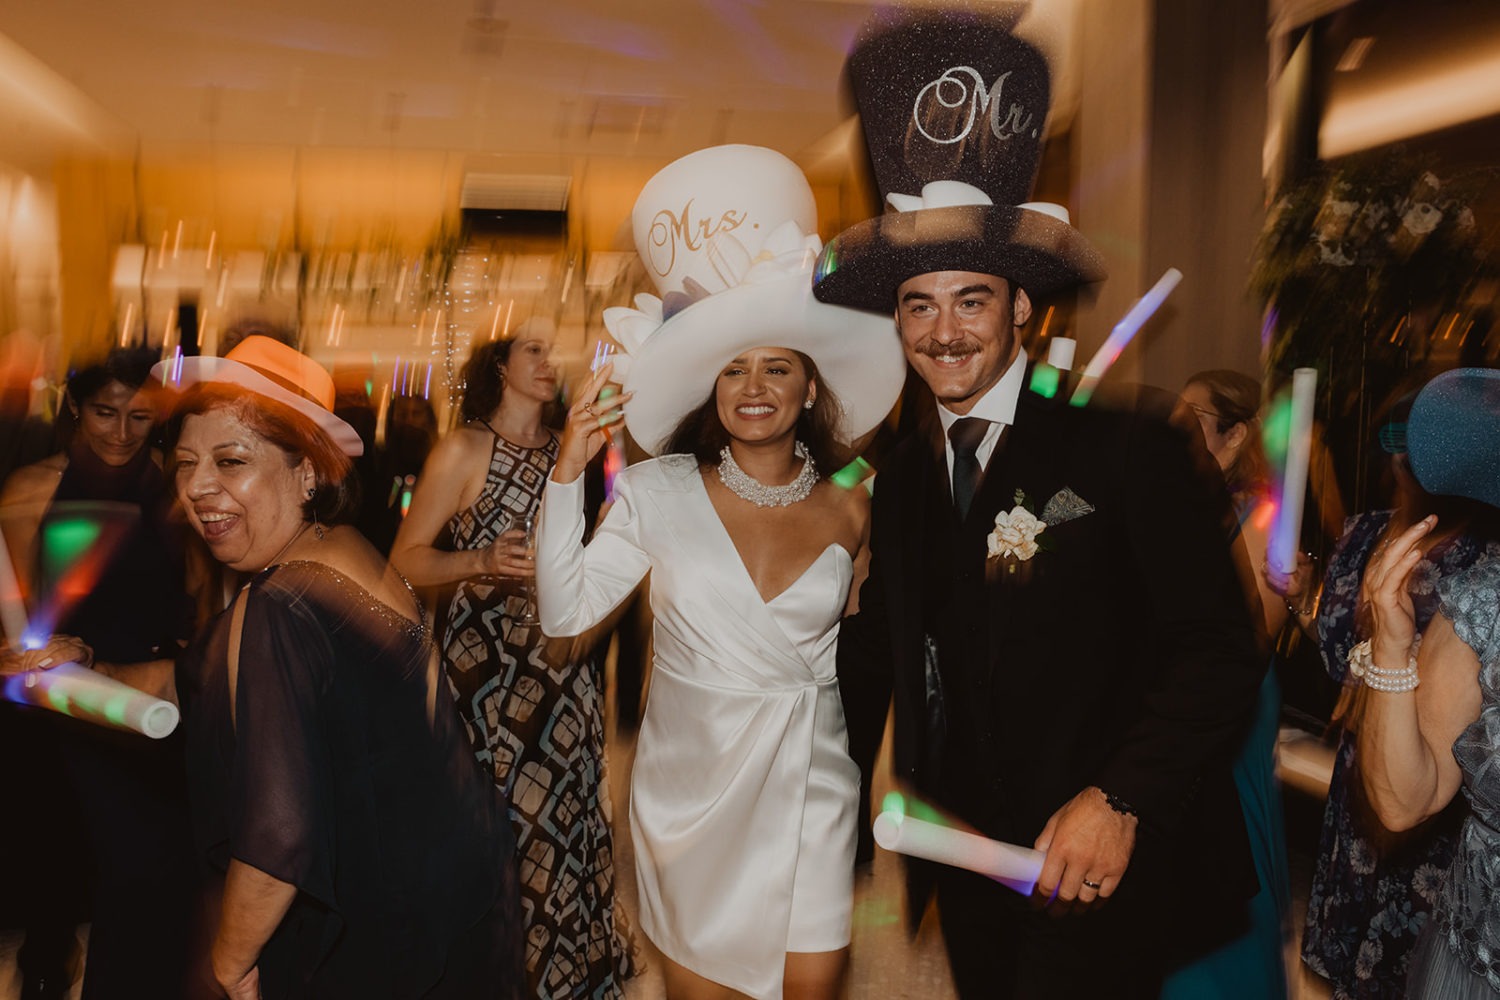 couple dances with glow sticks and large hats at wedding reception dance party